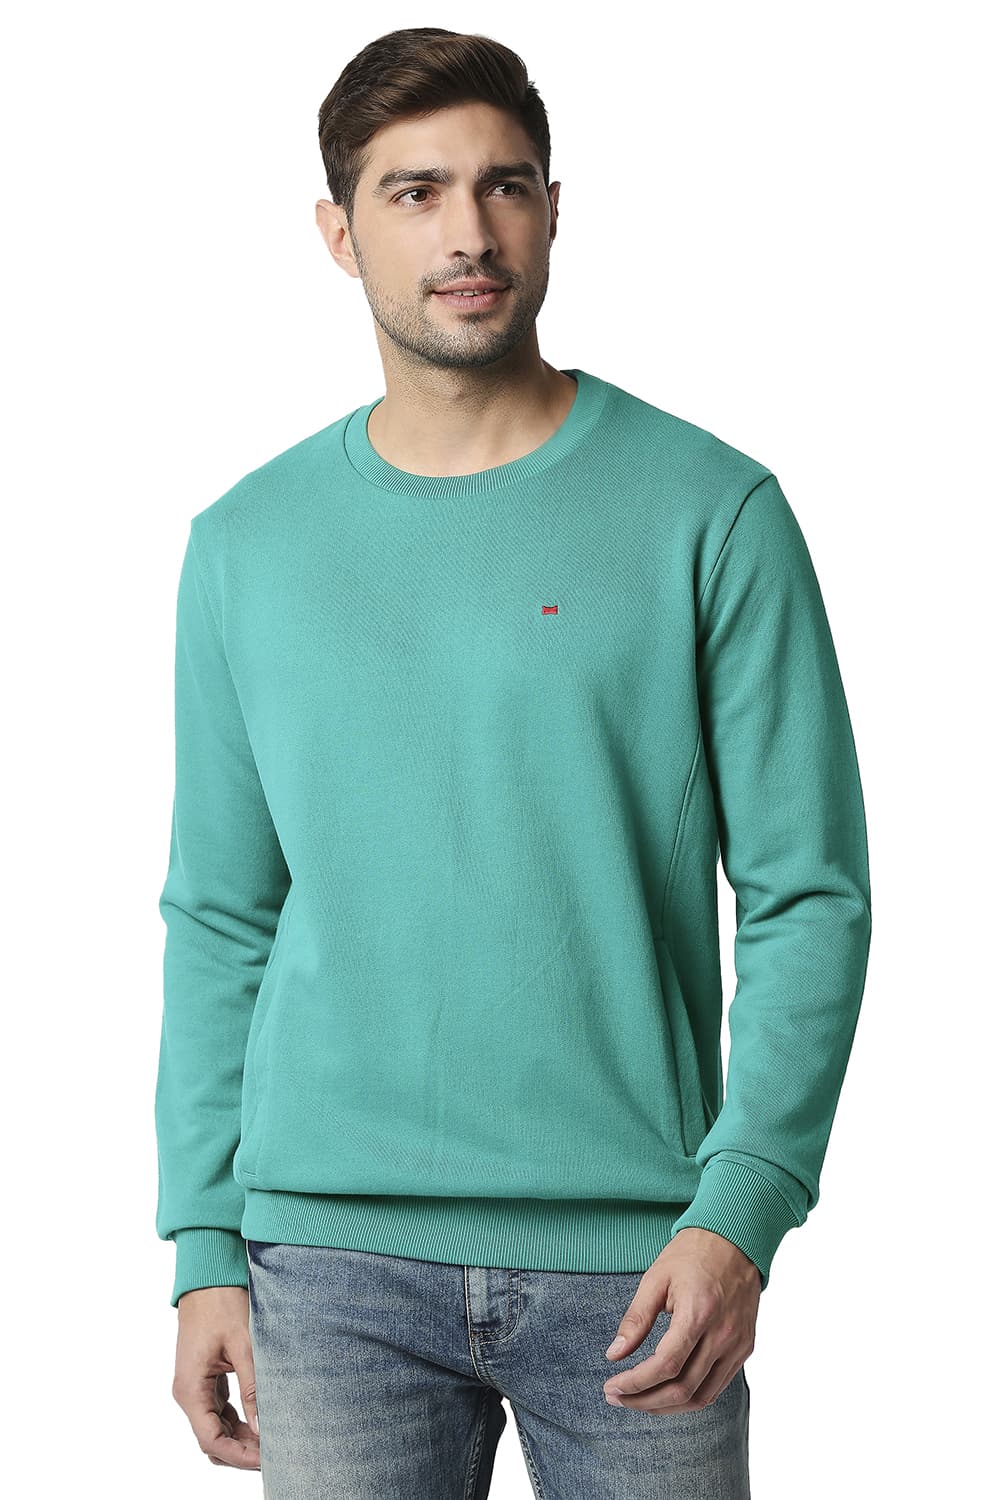 BASICS MUSCLE FIT NON BRUSHED FLEECE PULLOVER SWEATER